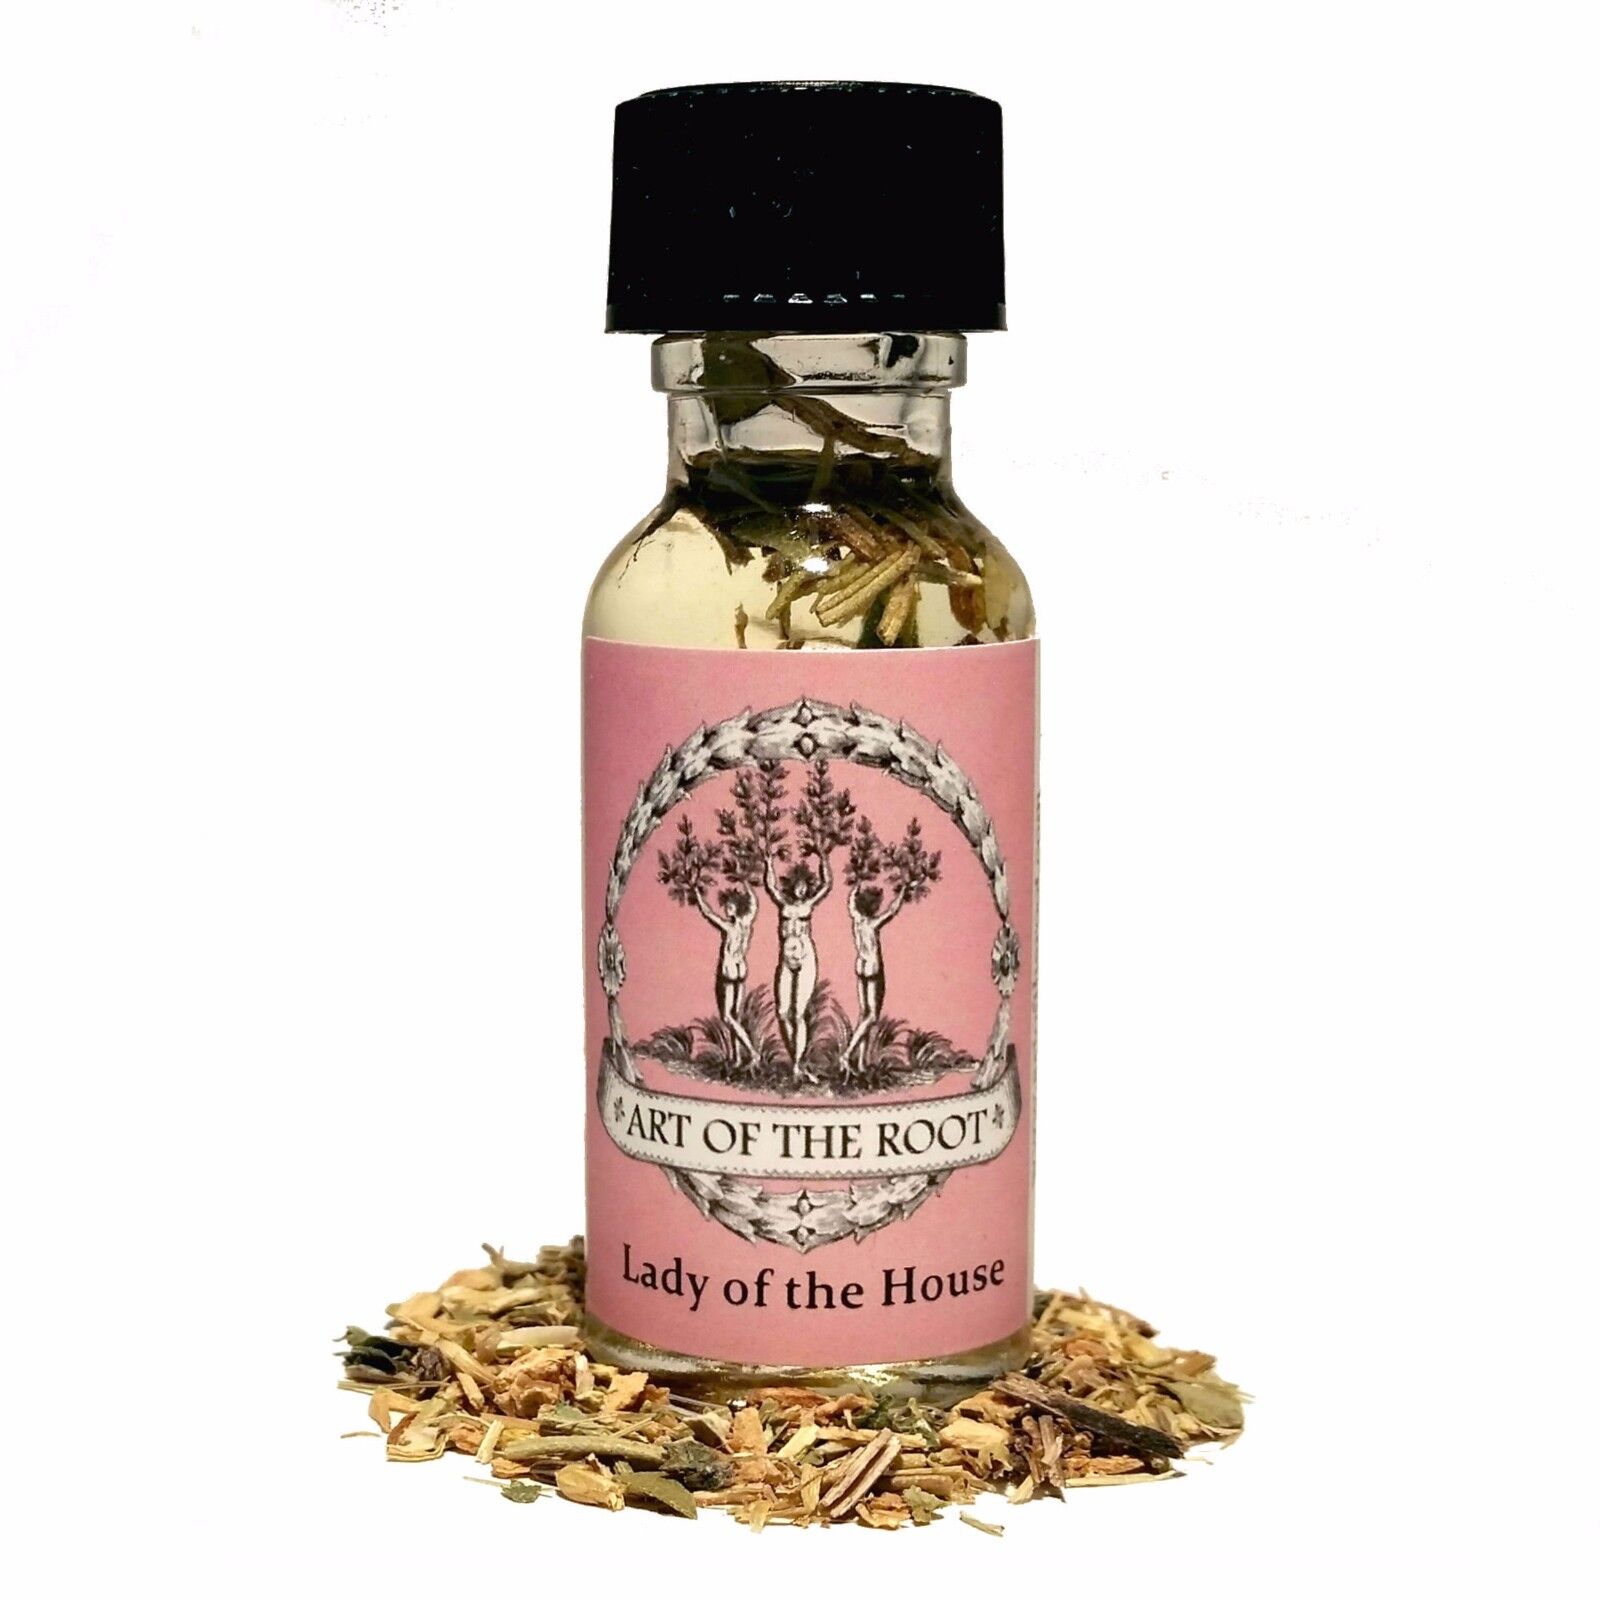 Lady of the House Oil Respect Fidelity Loyalty Control Hoodoo Wicca Pagan Voodoo